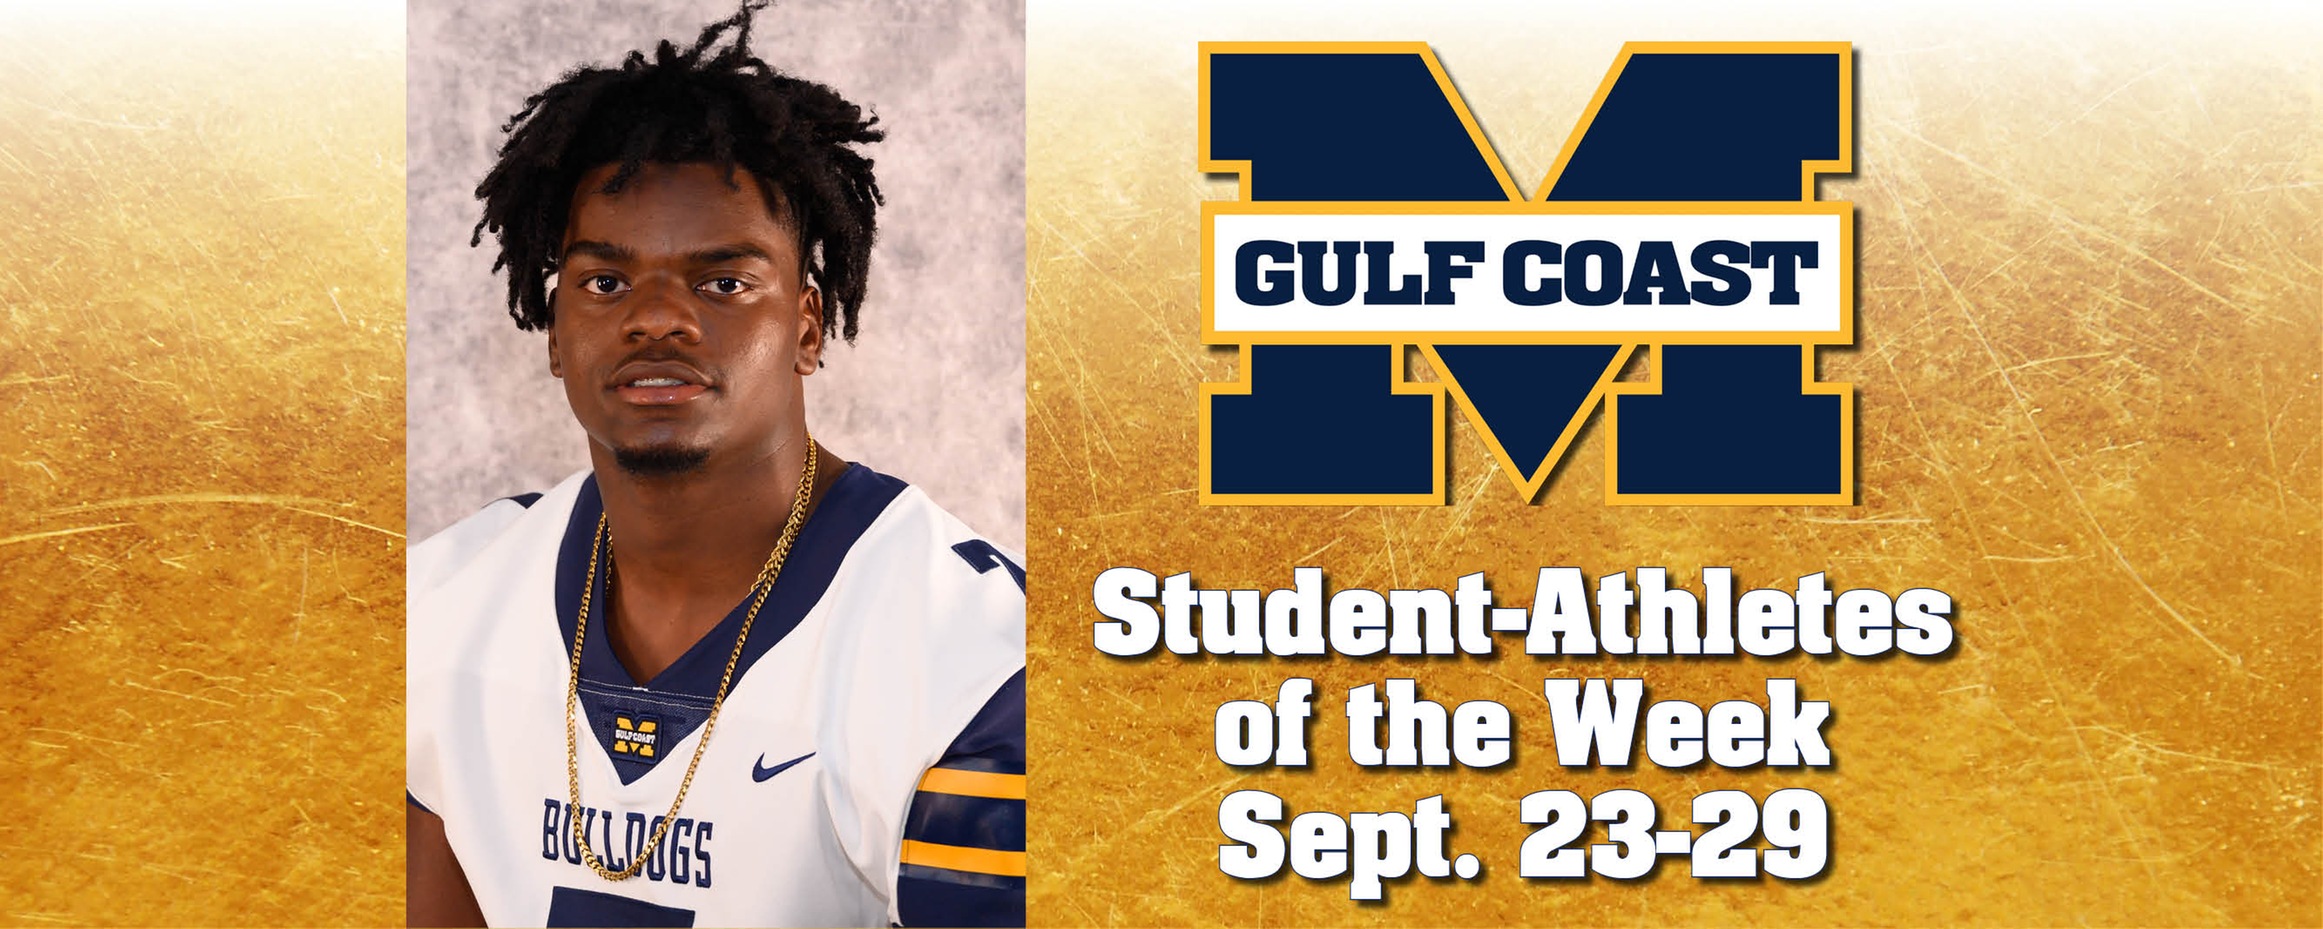 Matthews named MGCCC Student-Athlete of the Week